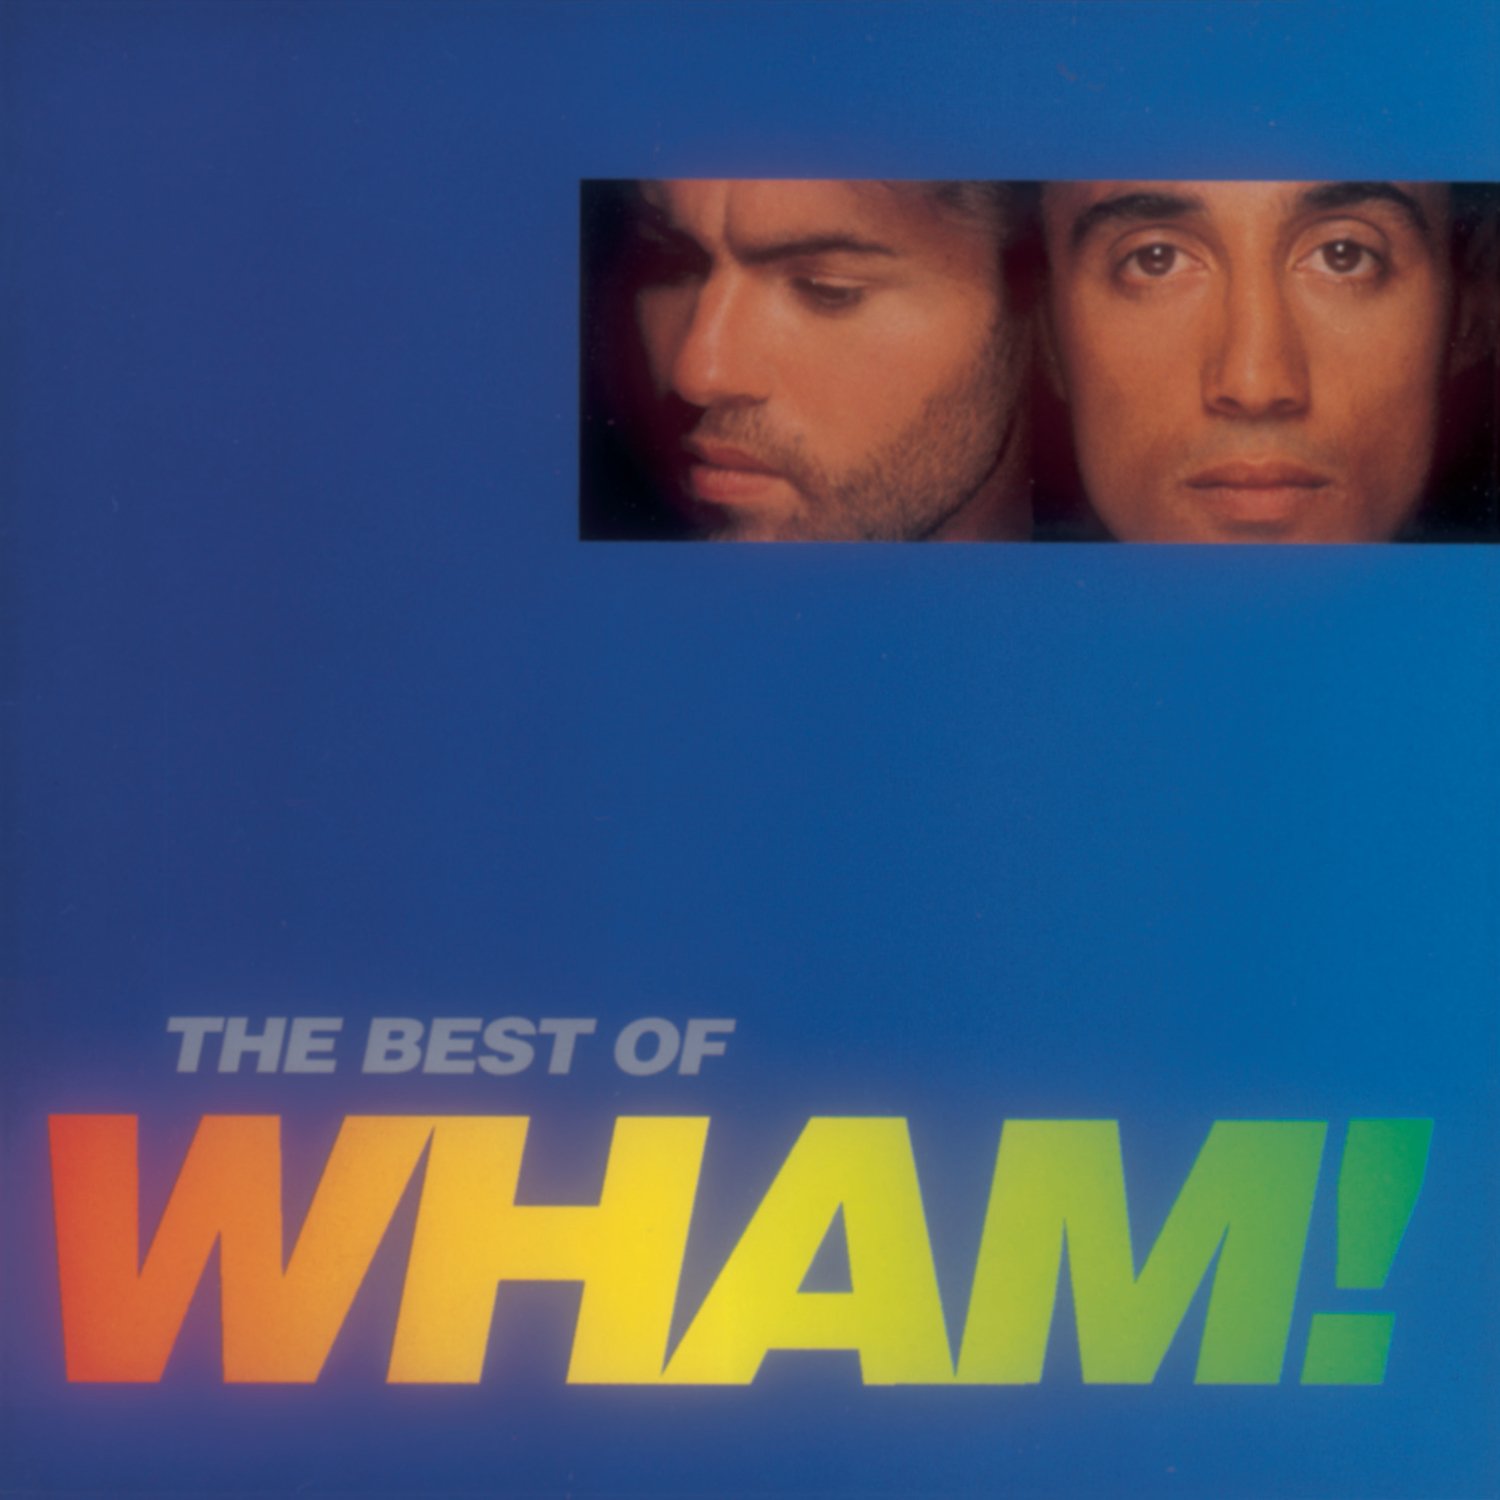 THE BEST OF WHAM! on MovieShack